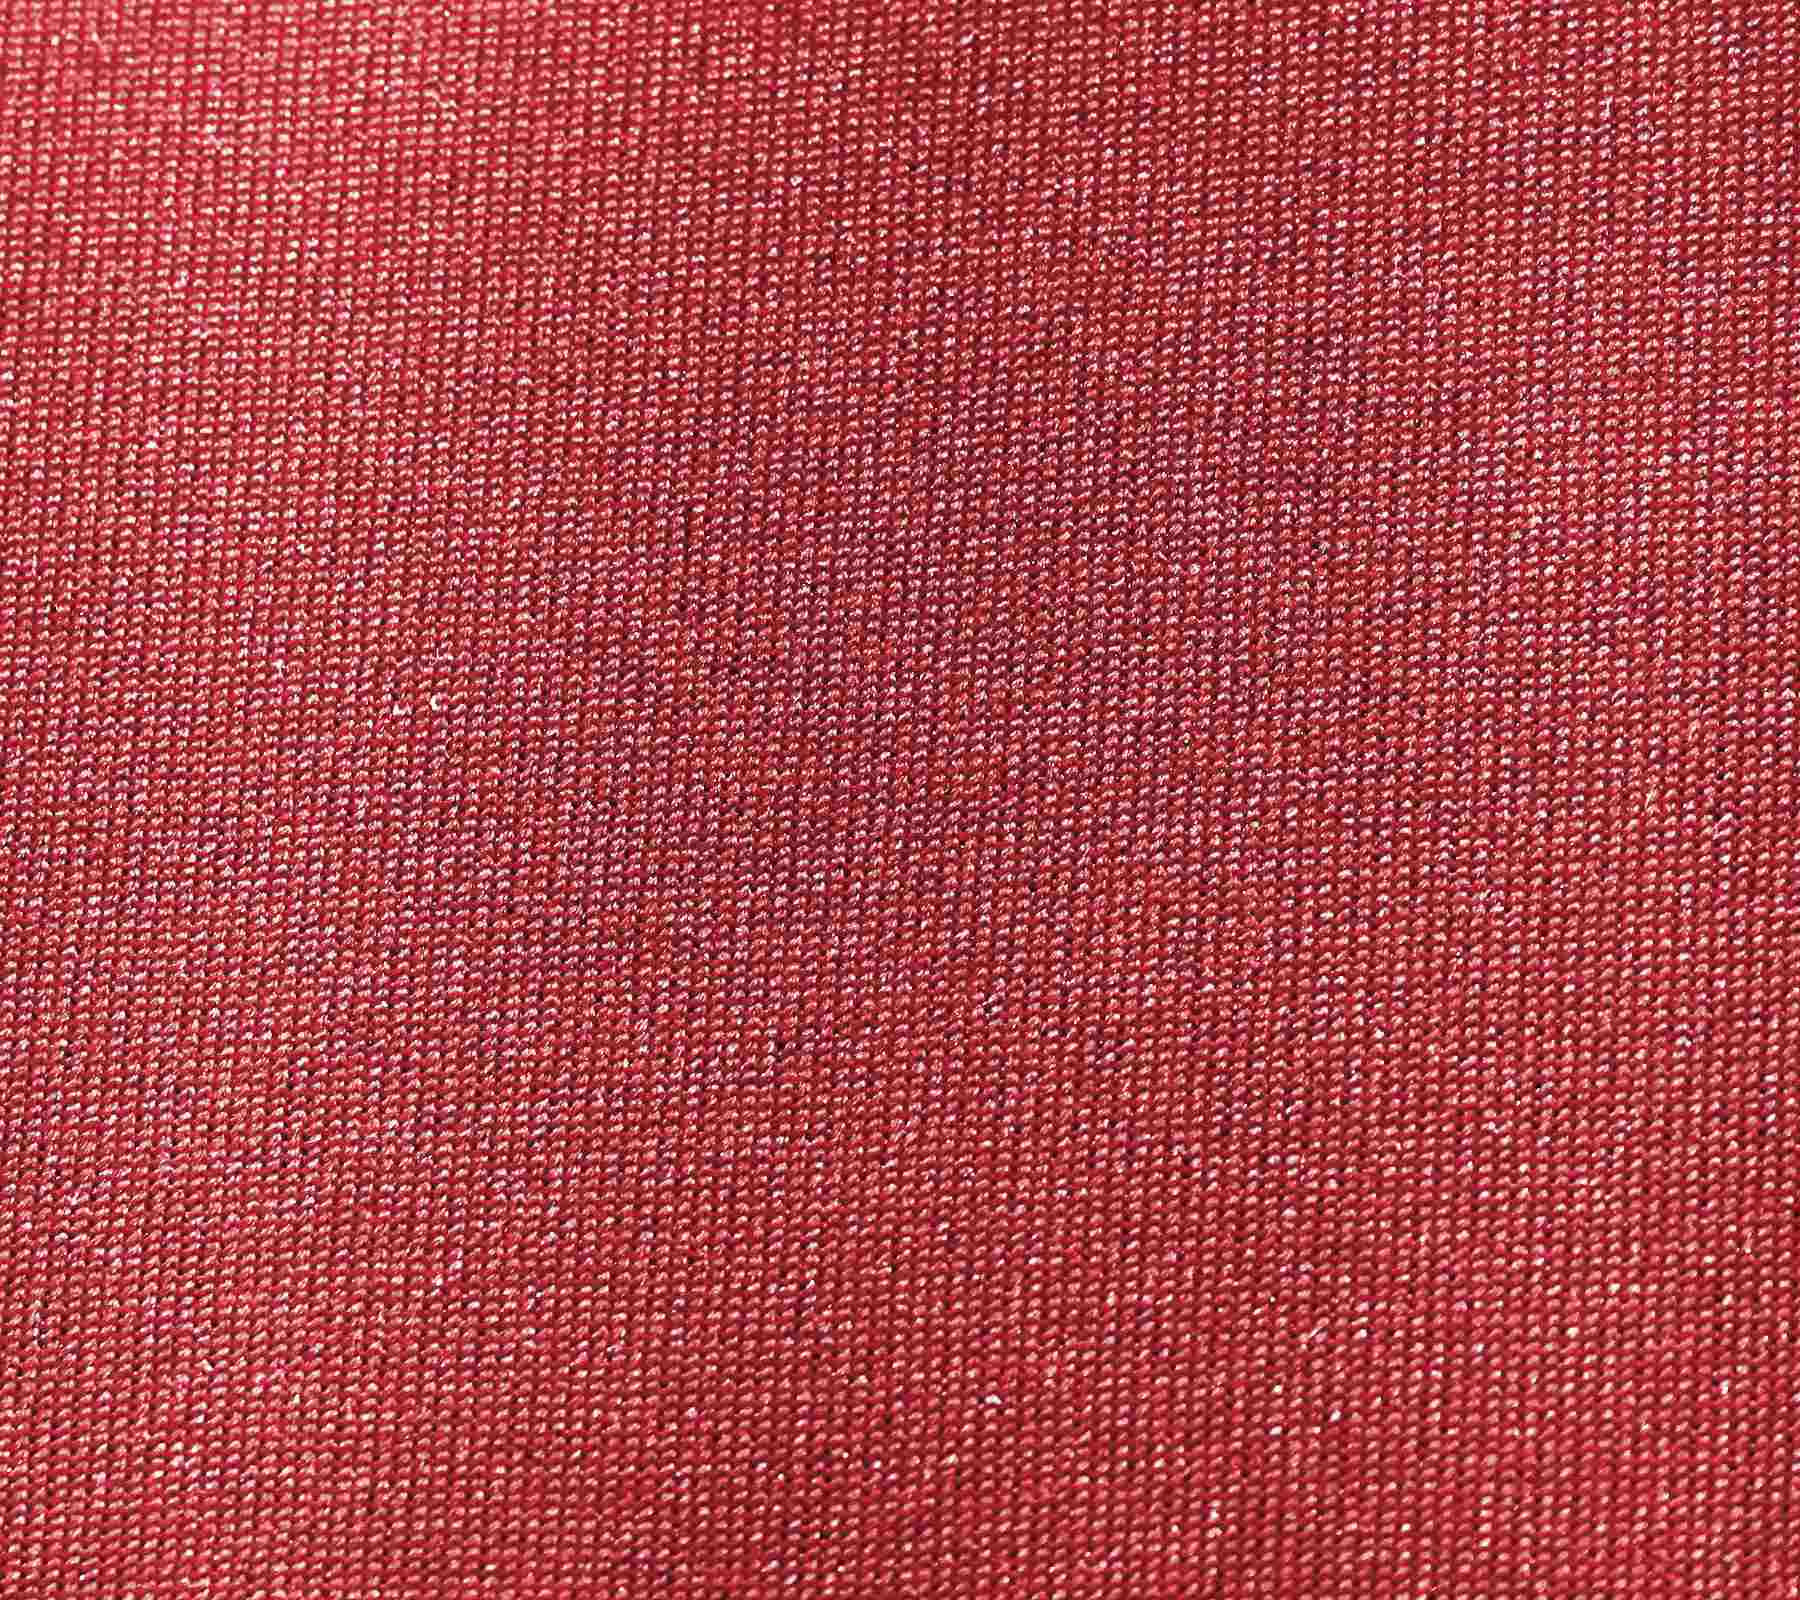 Red Woven Nylon Fabric 1800x1600 Background Image ...
